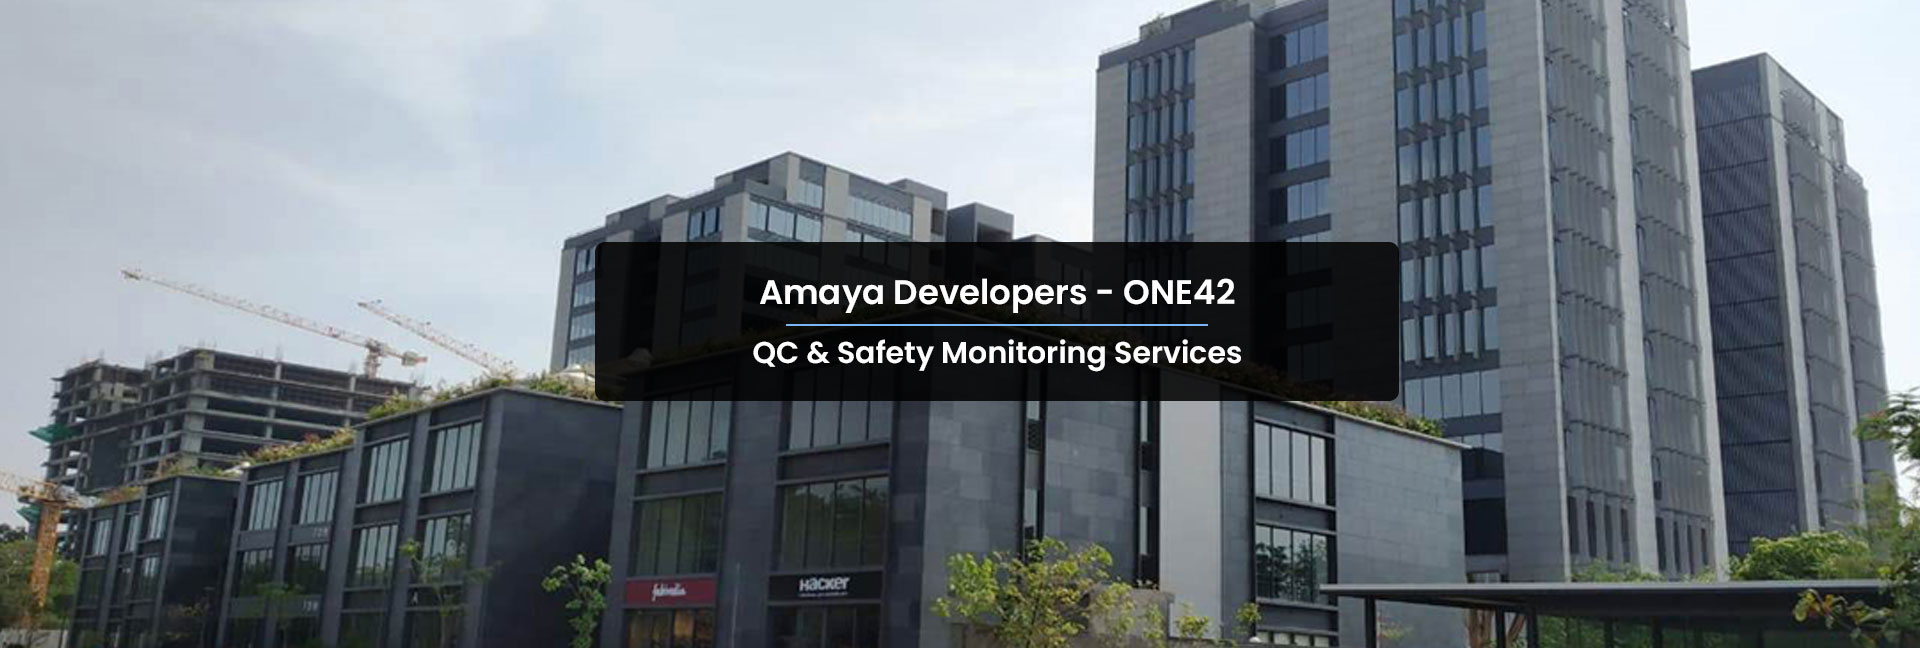 Engineering Supervision, Quality Control and Safety Monitoring services-Amaya ONE42